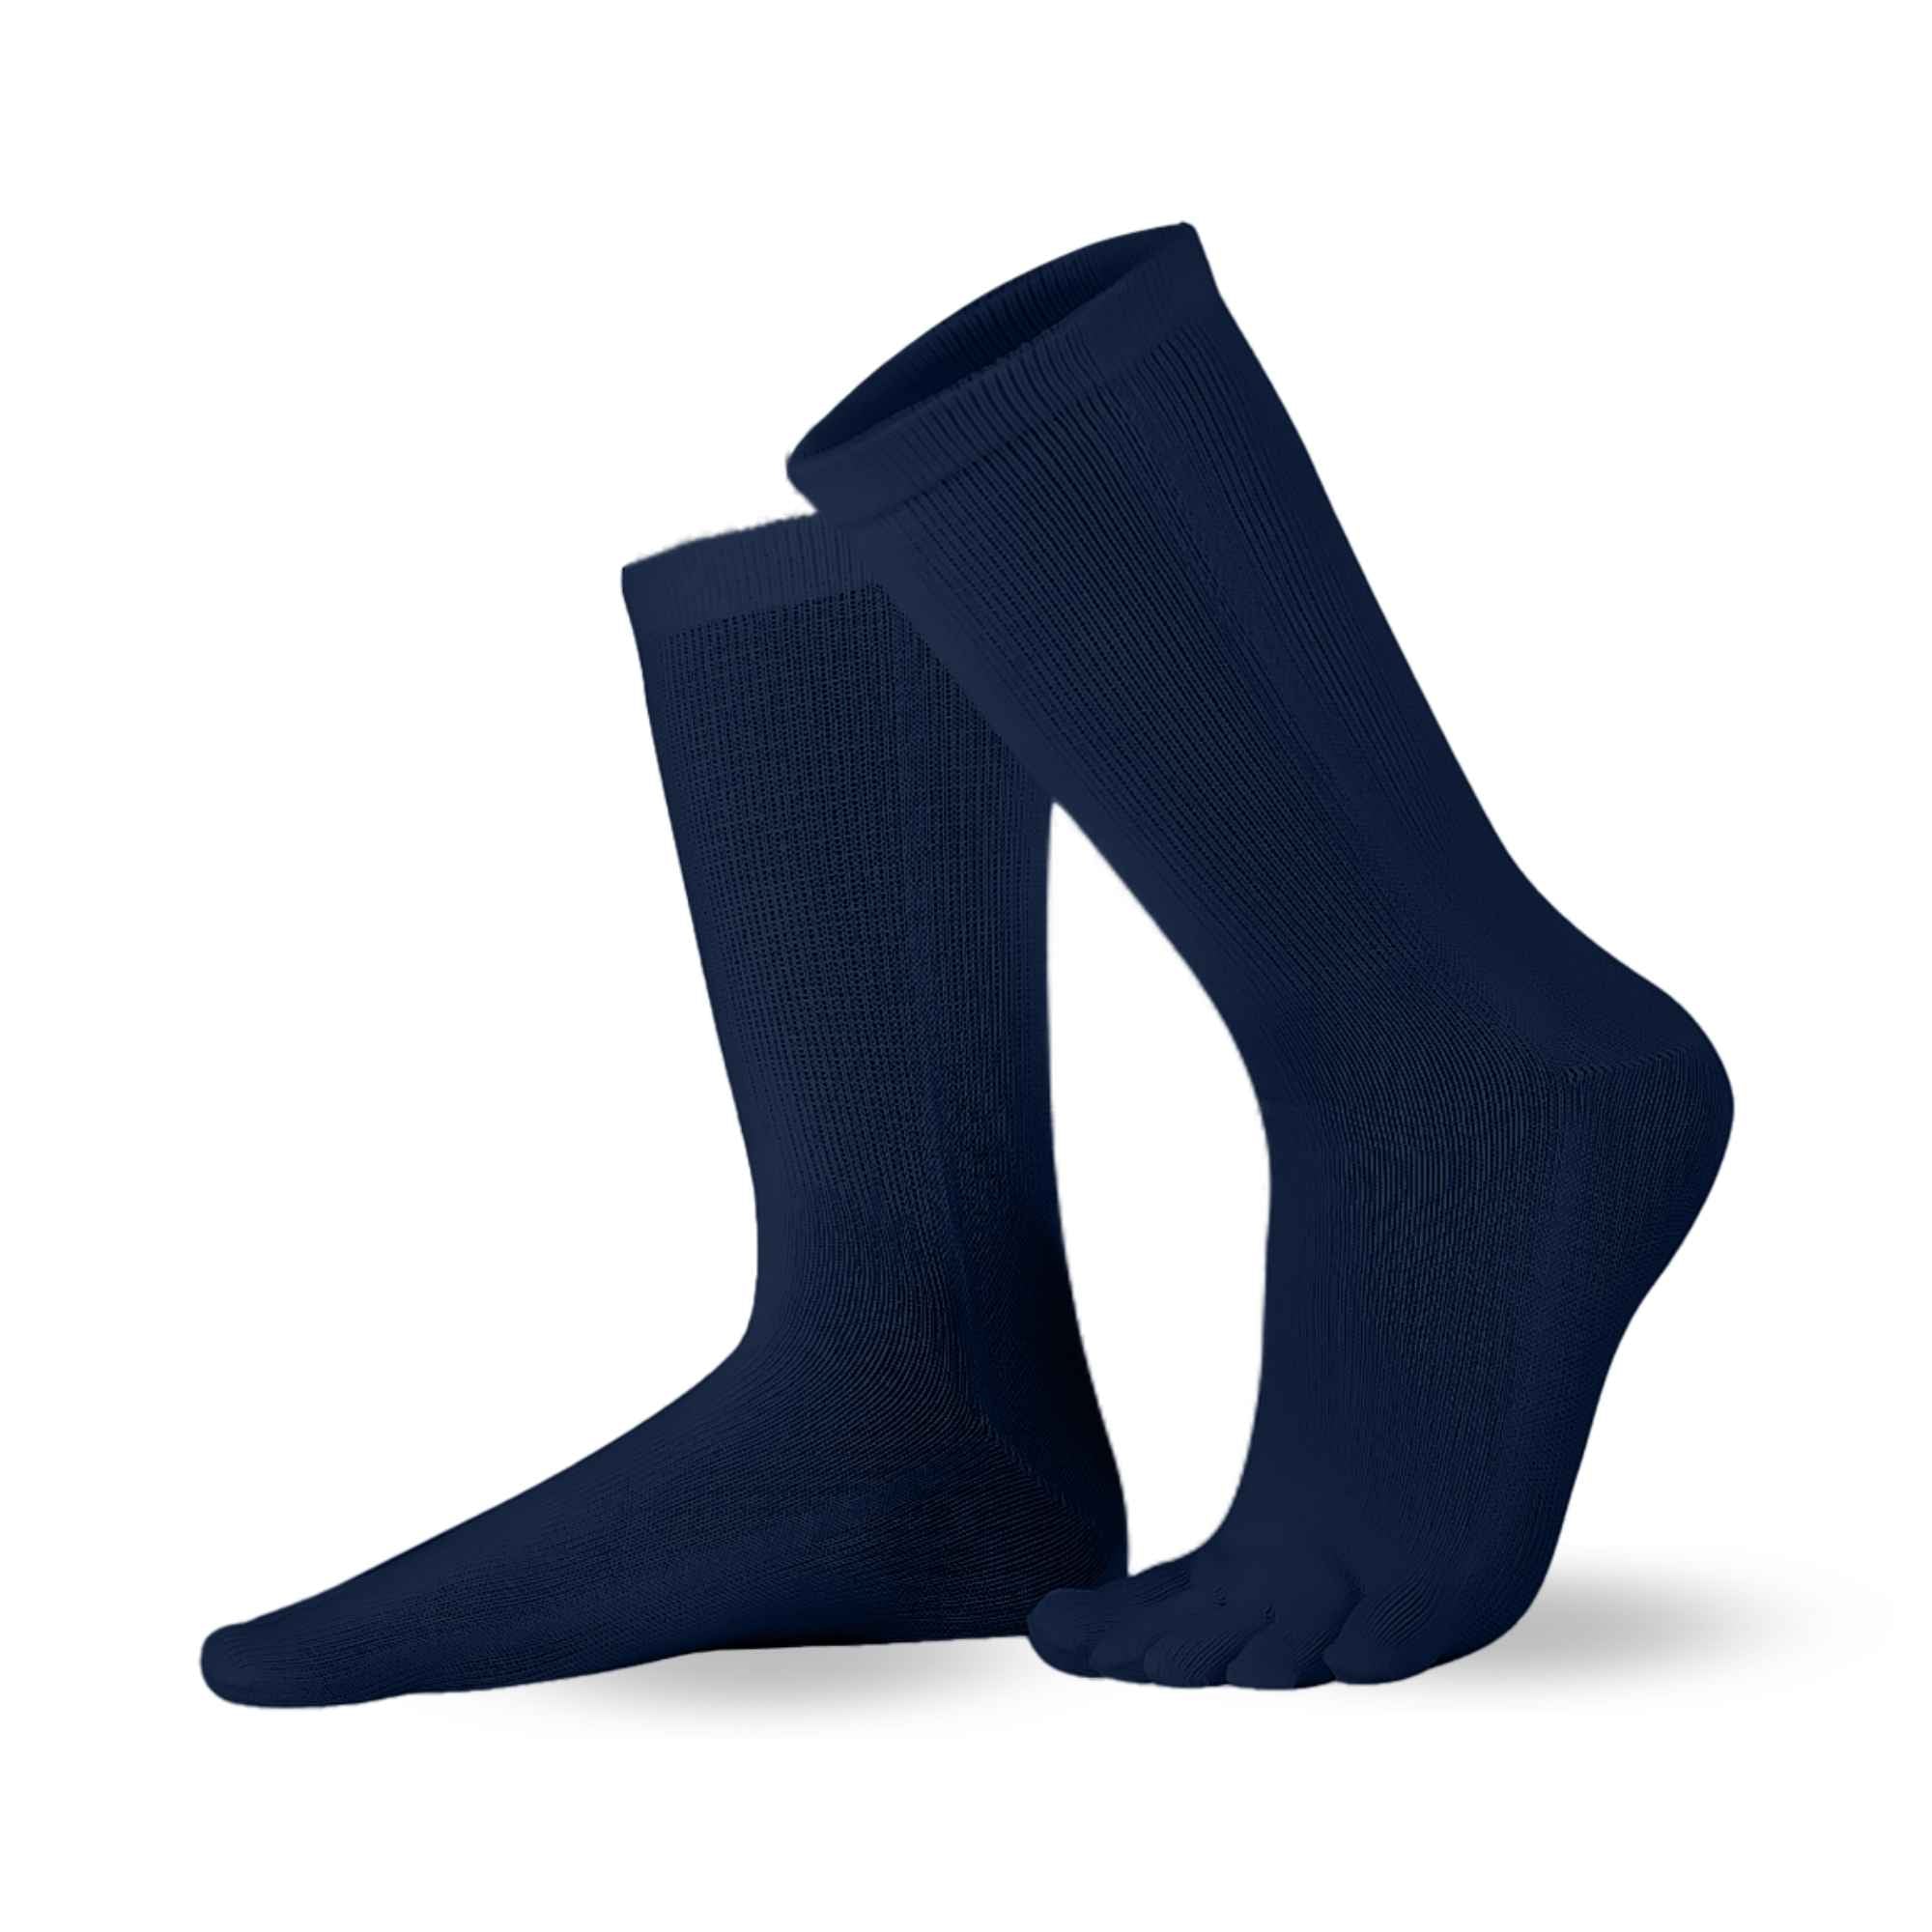 Knitido Essentials toe socks from cotton in navy